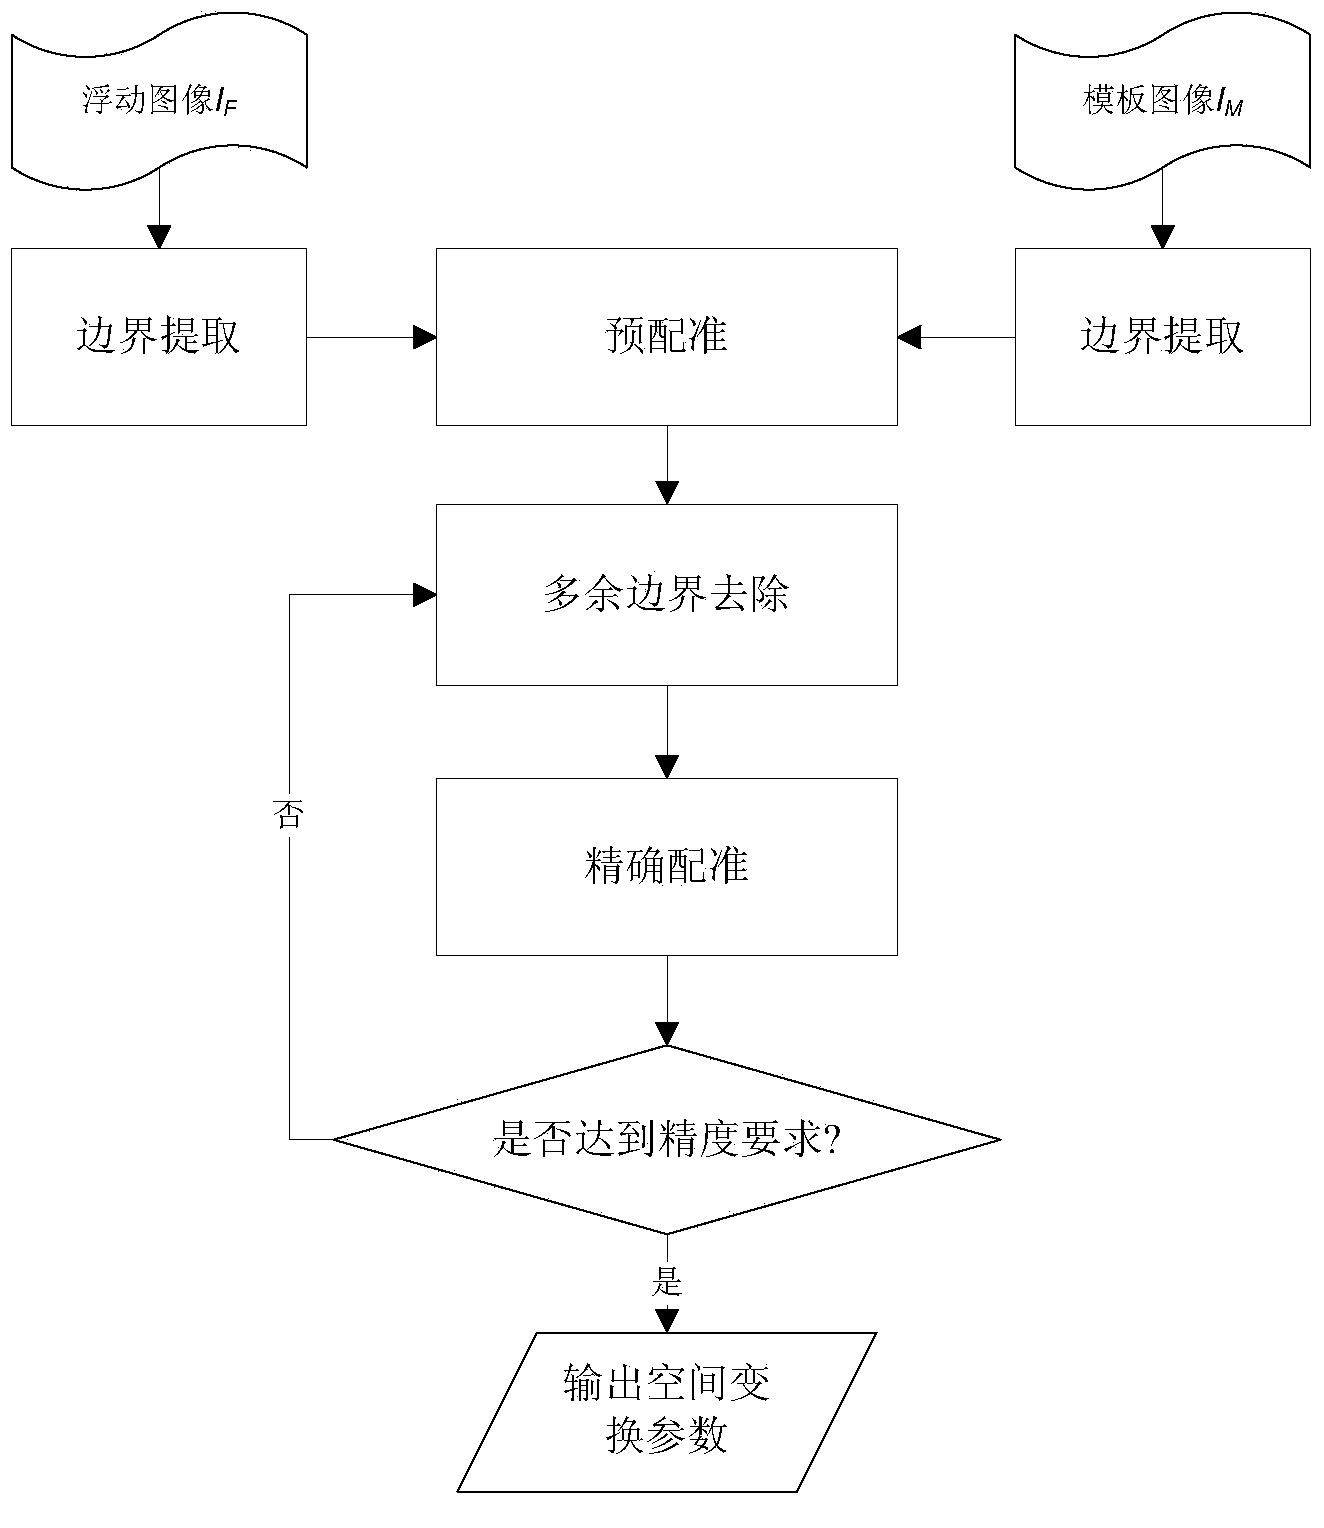 Two-dimensional image registration method for partially matched images